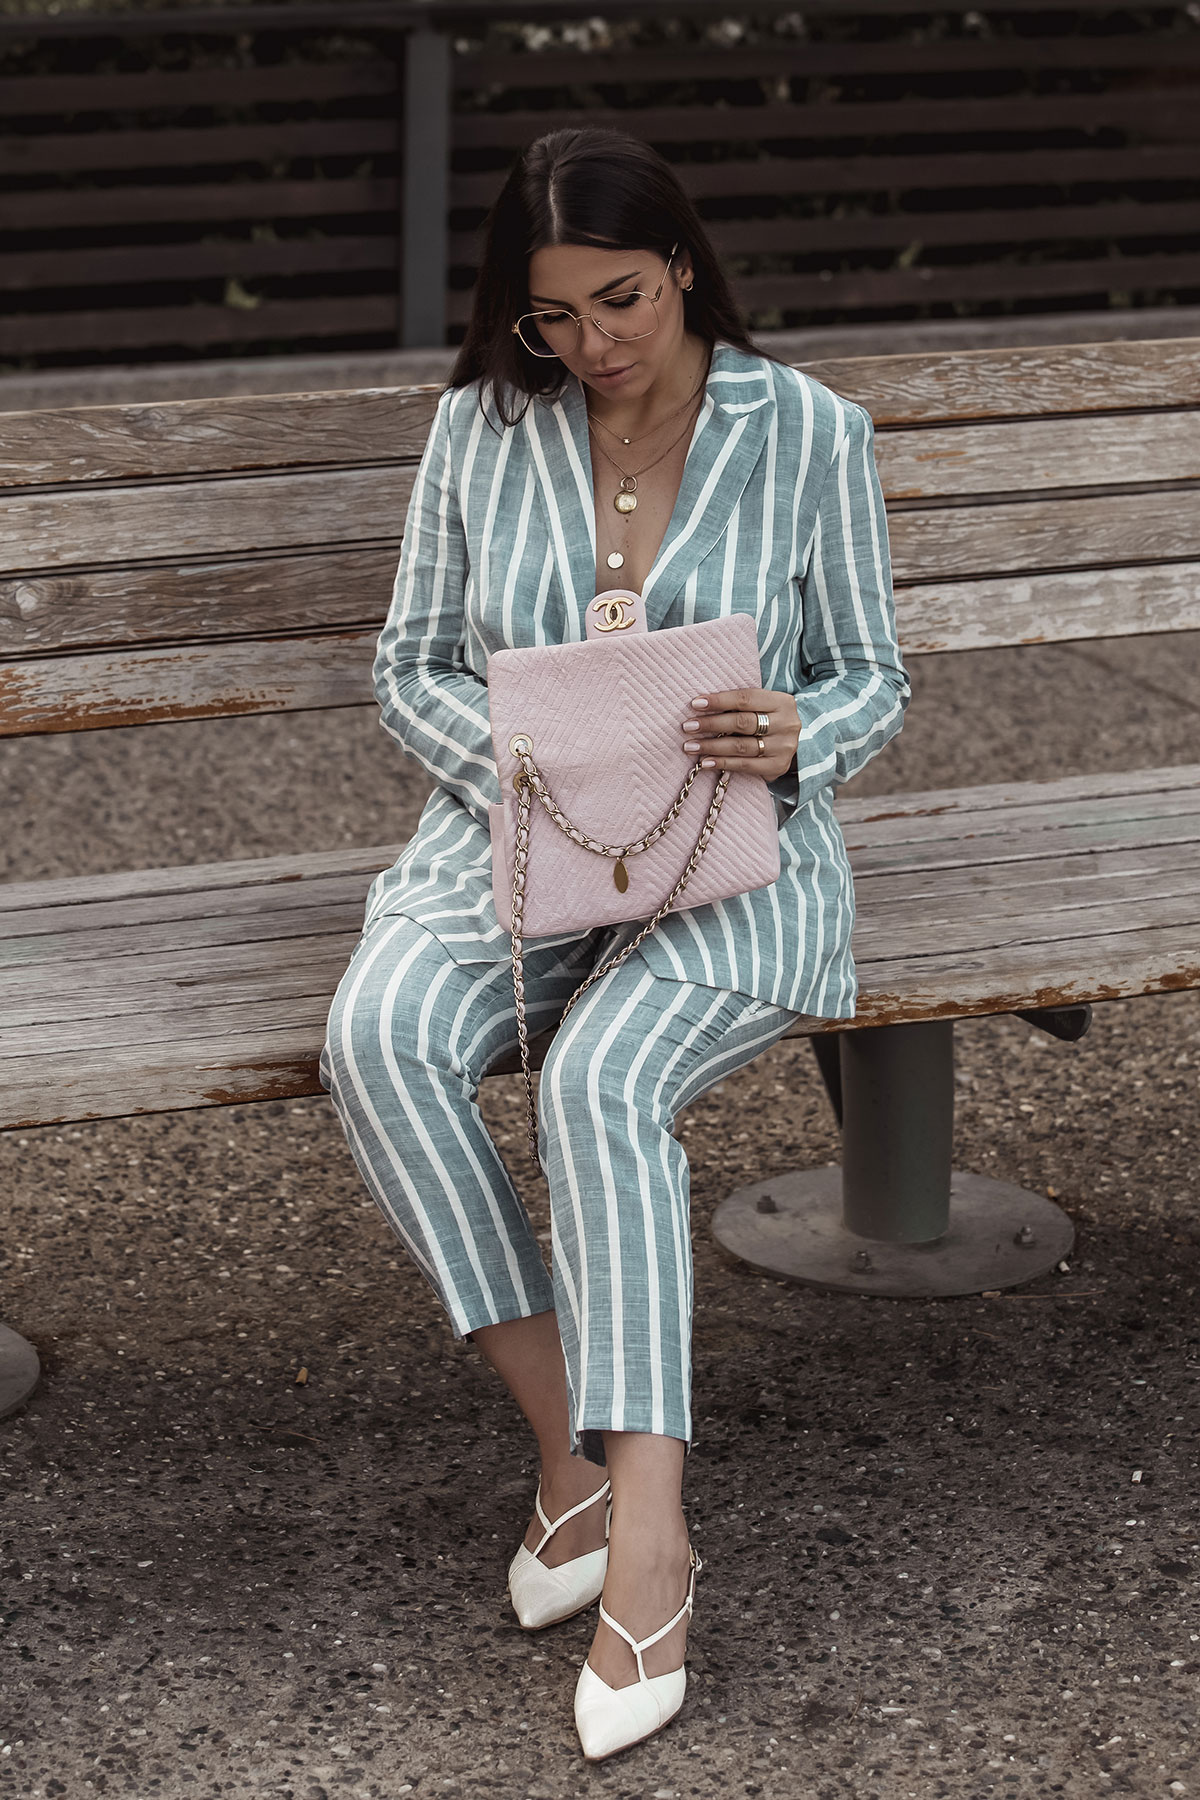 Stella Asteria wearing striped suit and pink Chanel chevron bag